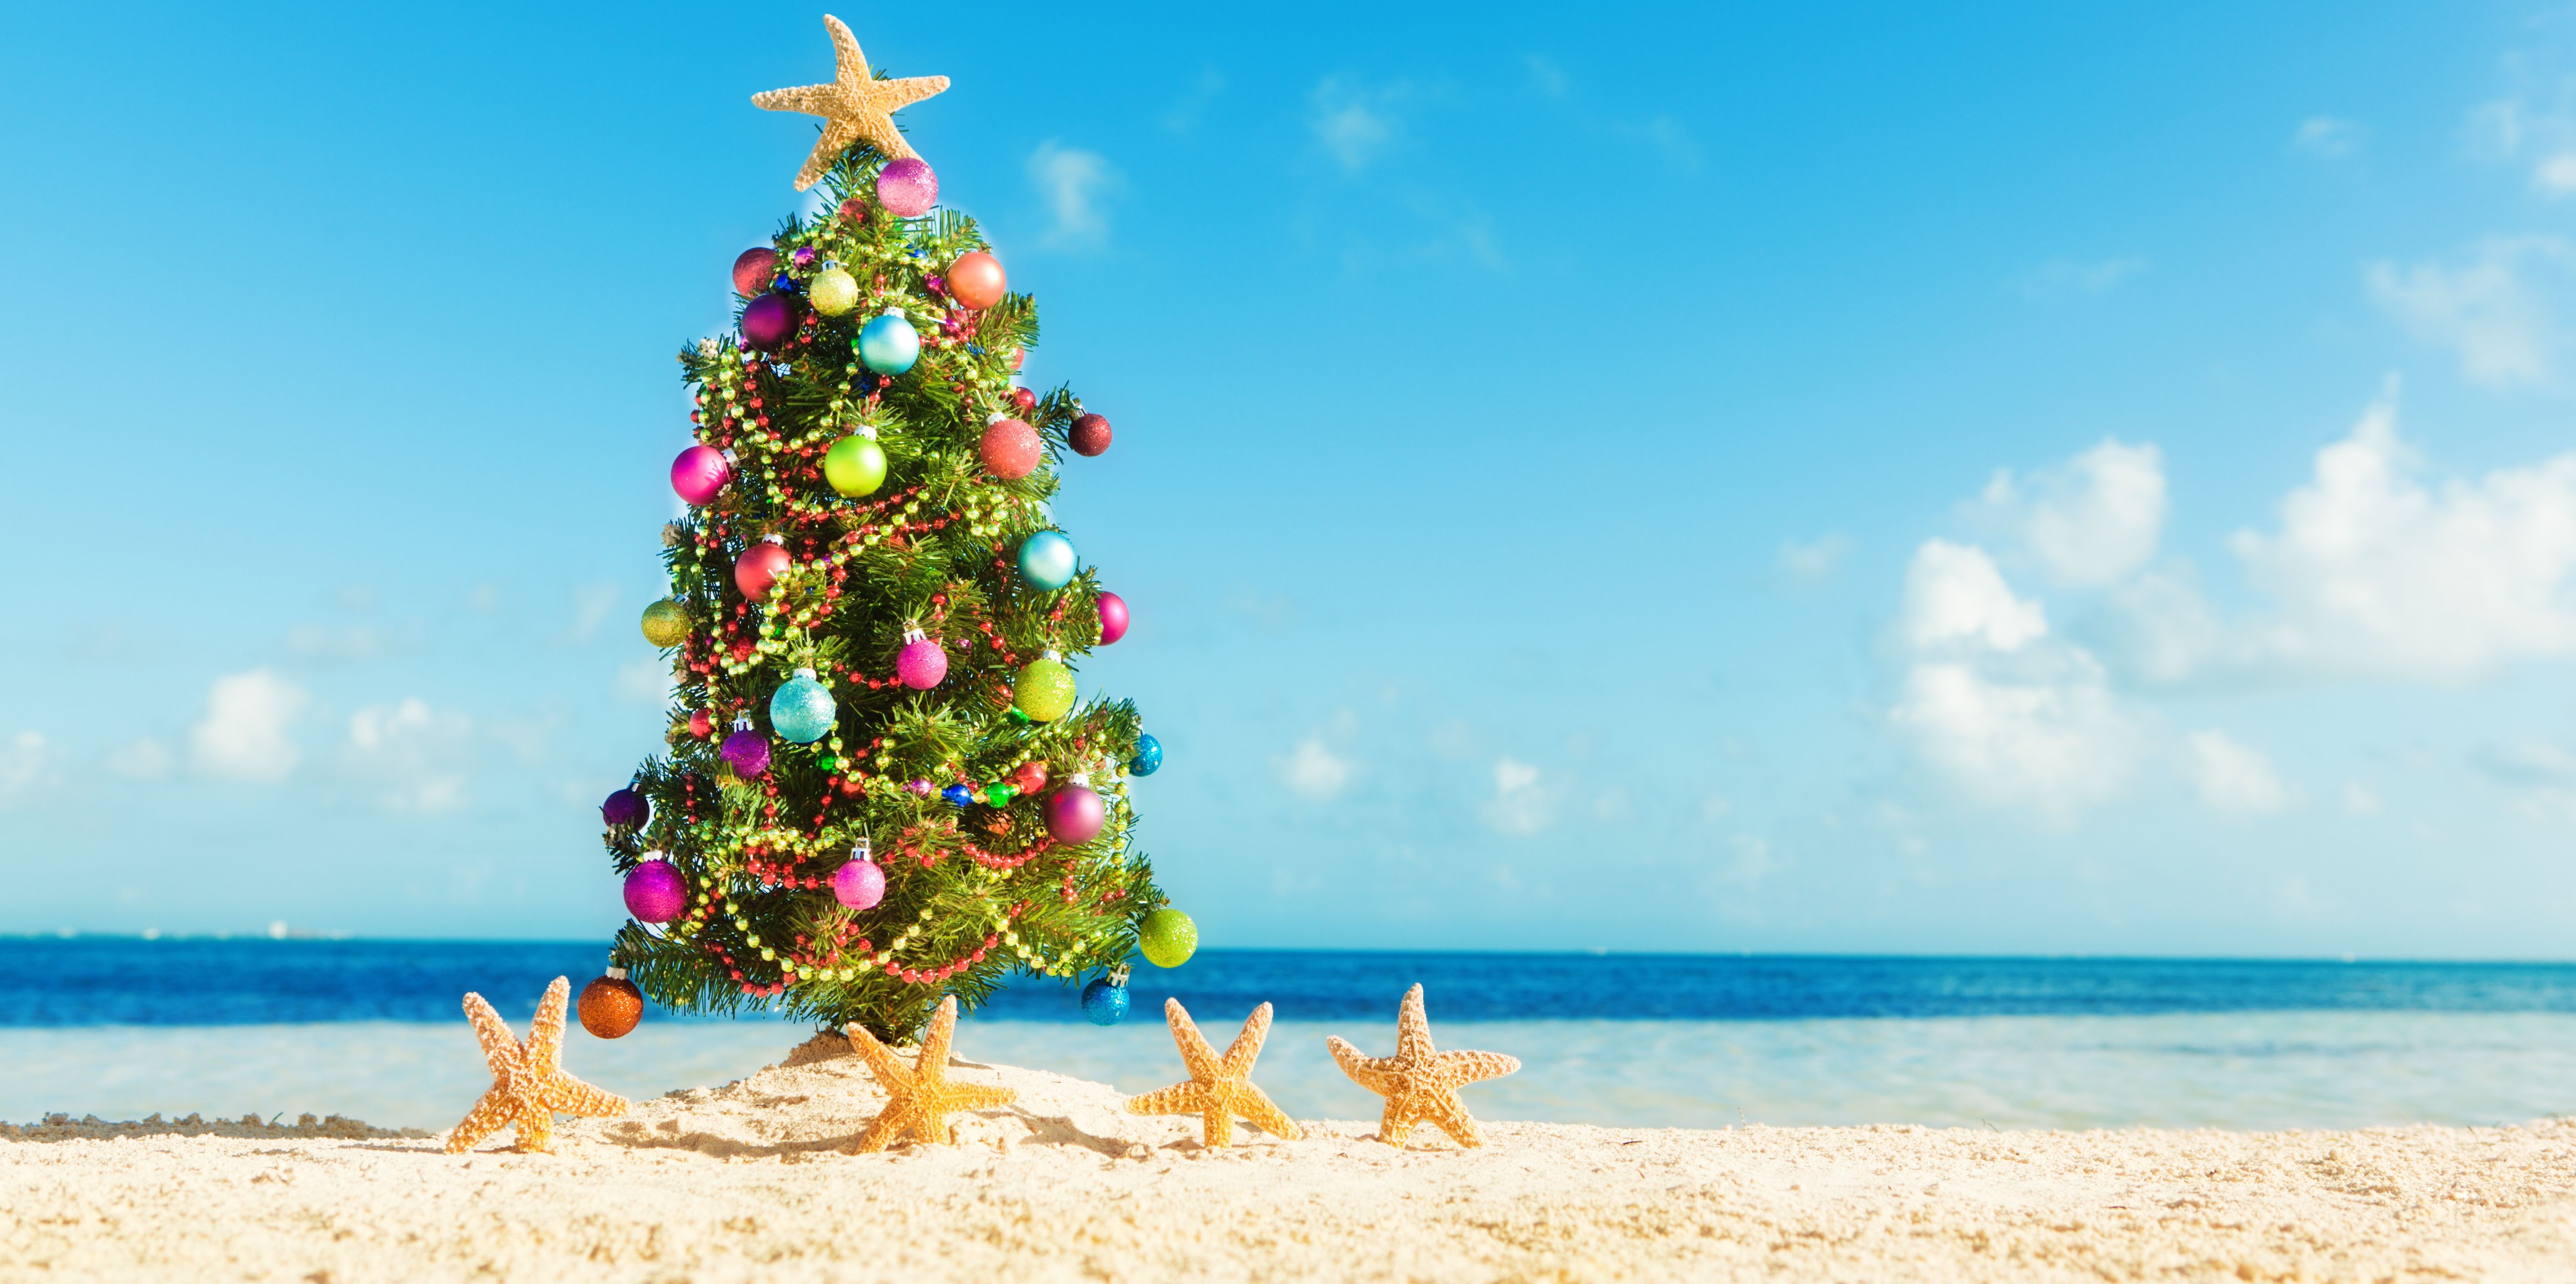 Christmas Beach Tree Wallpapers - Wallpaper Cave.